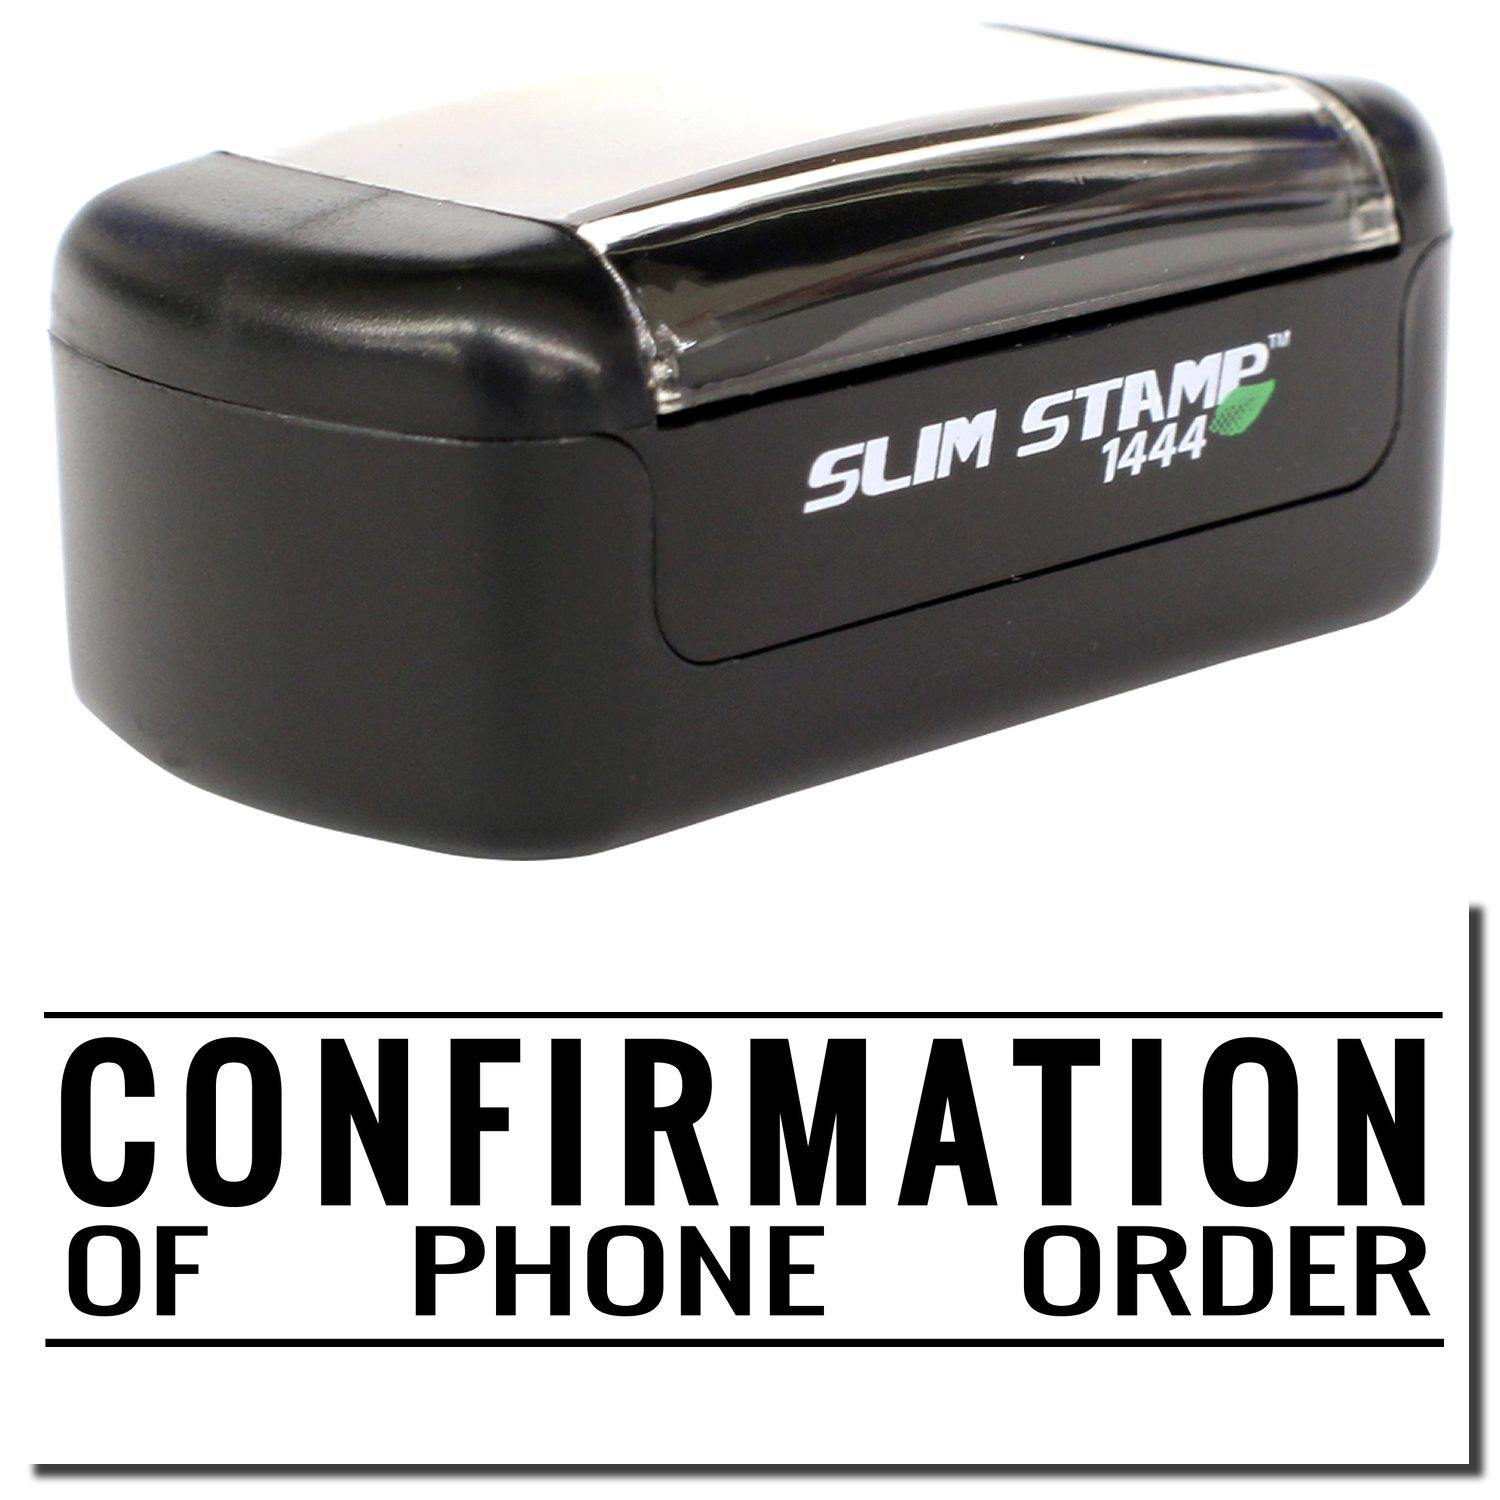 A stock office pre-inked stamp with a stamped image showing how the text "CONFIRMATION OF PHONE ORDER" is displayed after stamping.